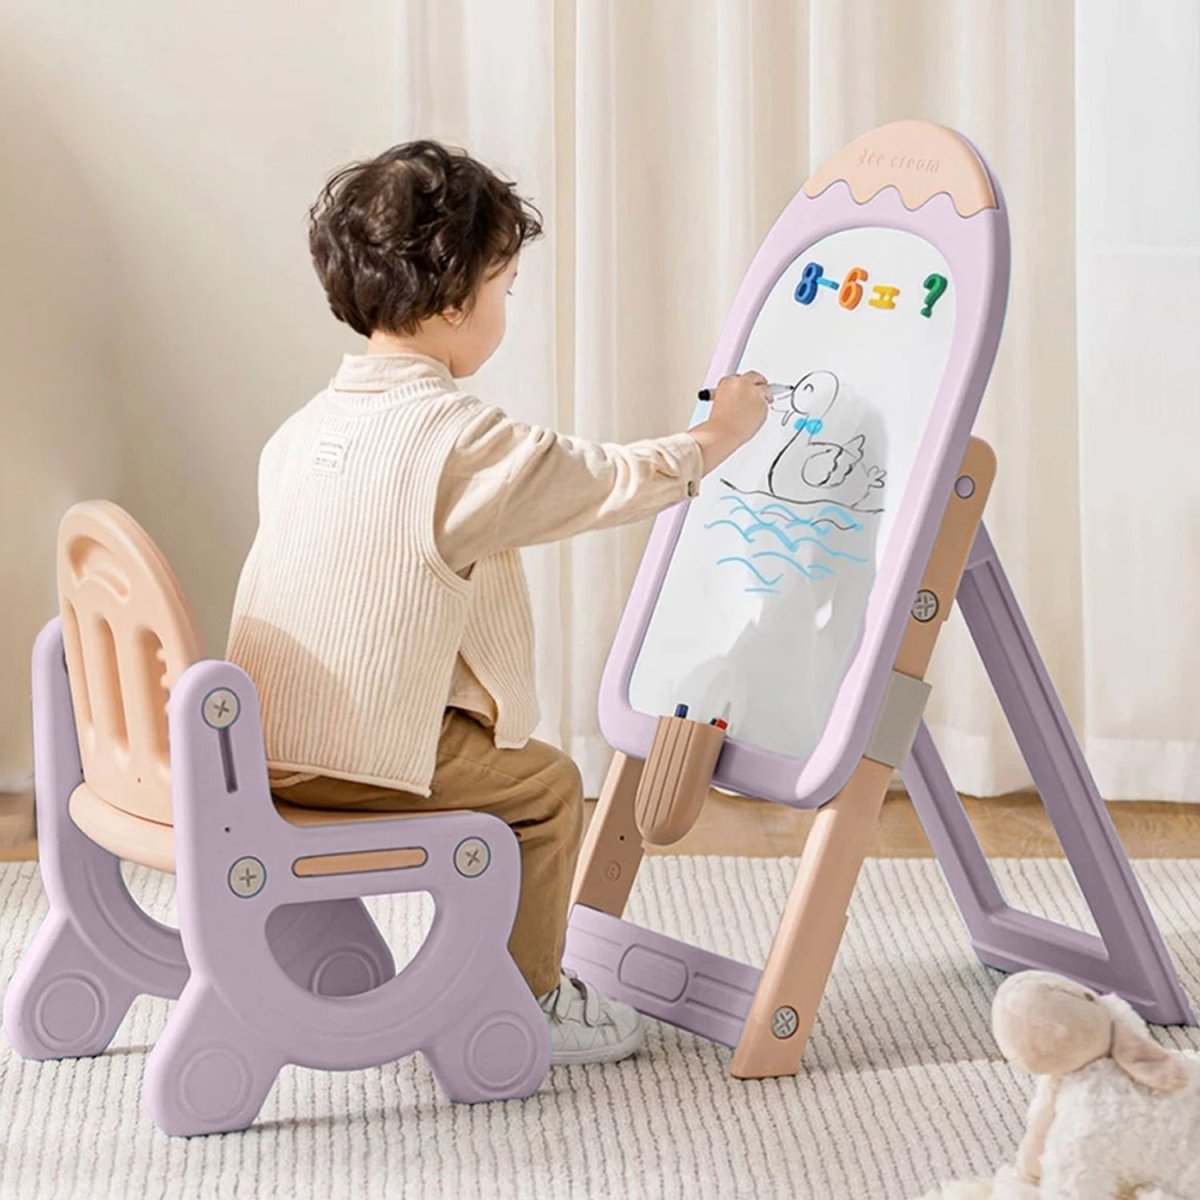 R for Rabbit Little Genius Candy- Set of Board & Chair- Purple - FNLGCCBP03